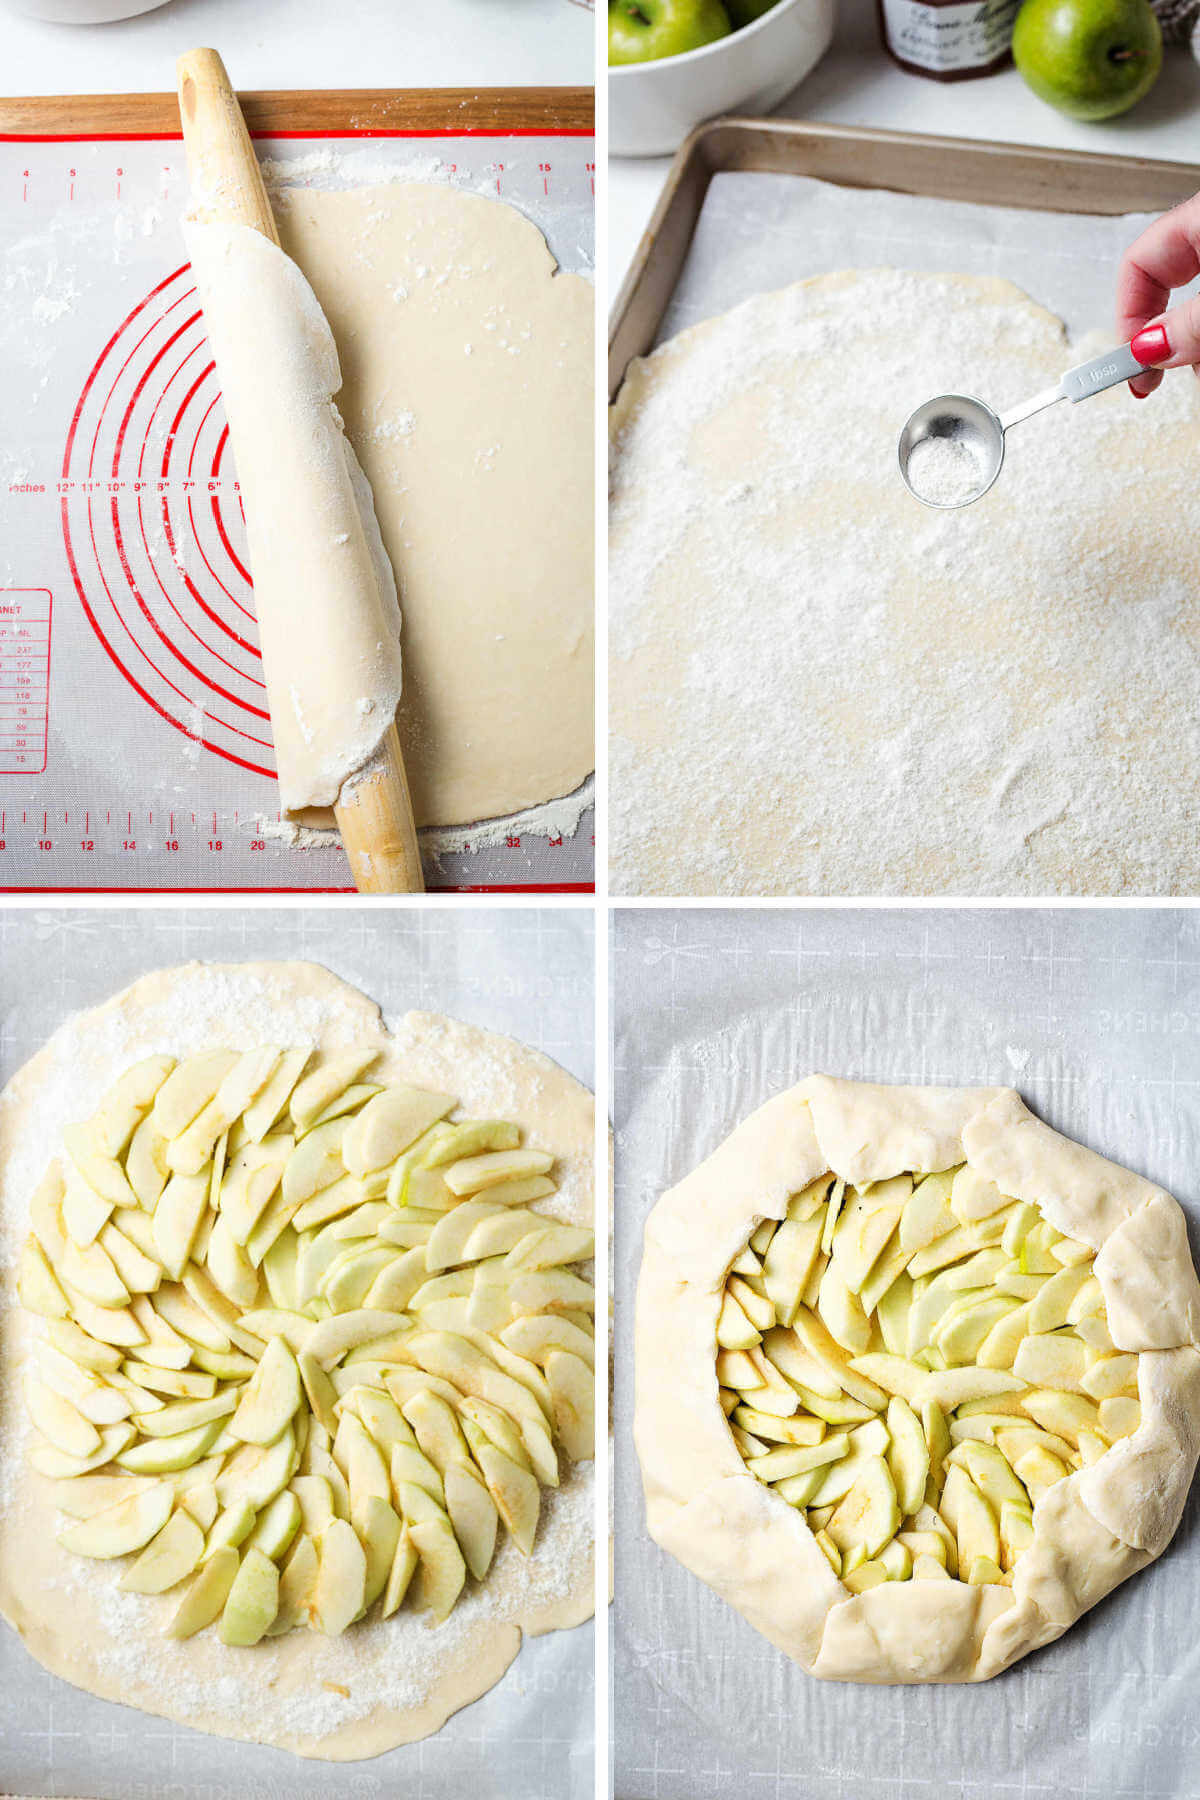 transferring dough circle to a baking sheet; layerd of sliced apples on top of dough.